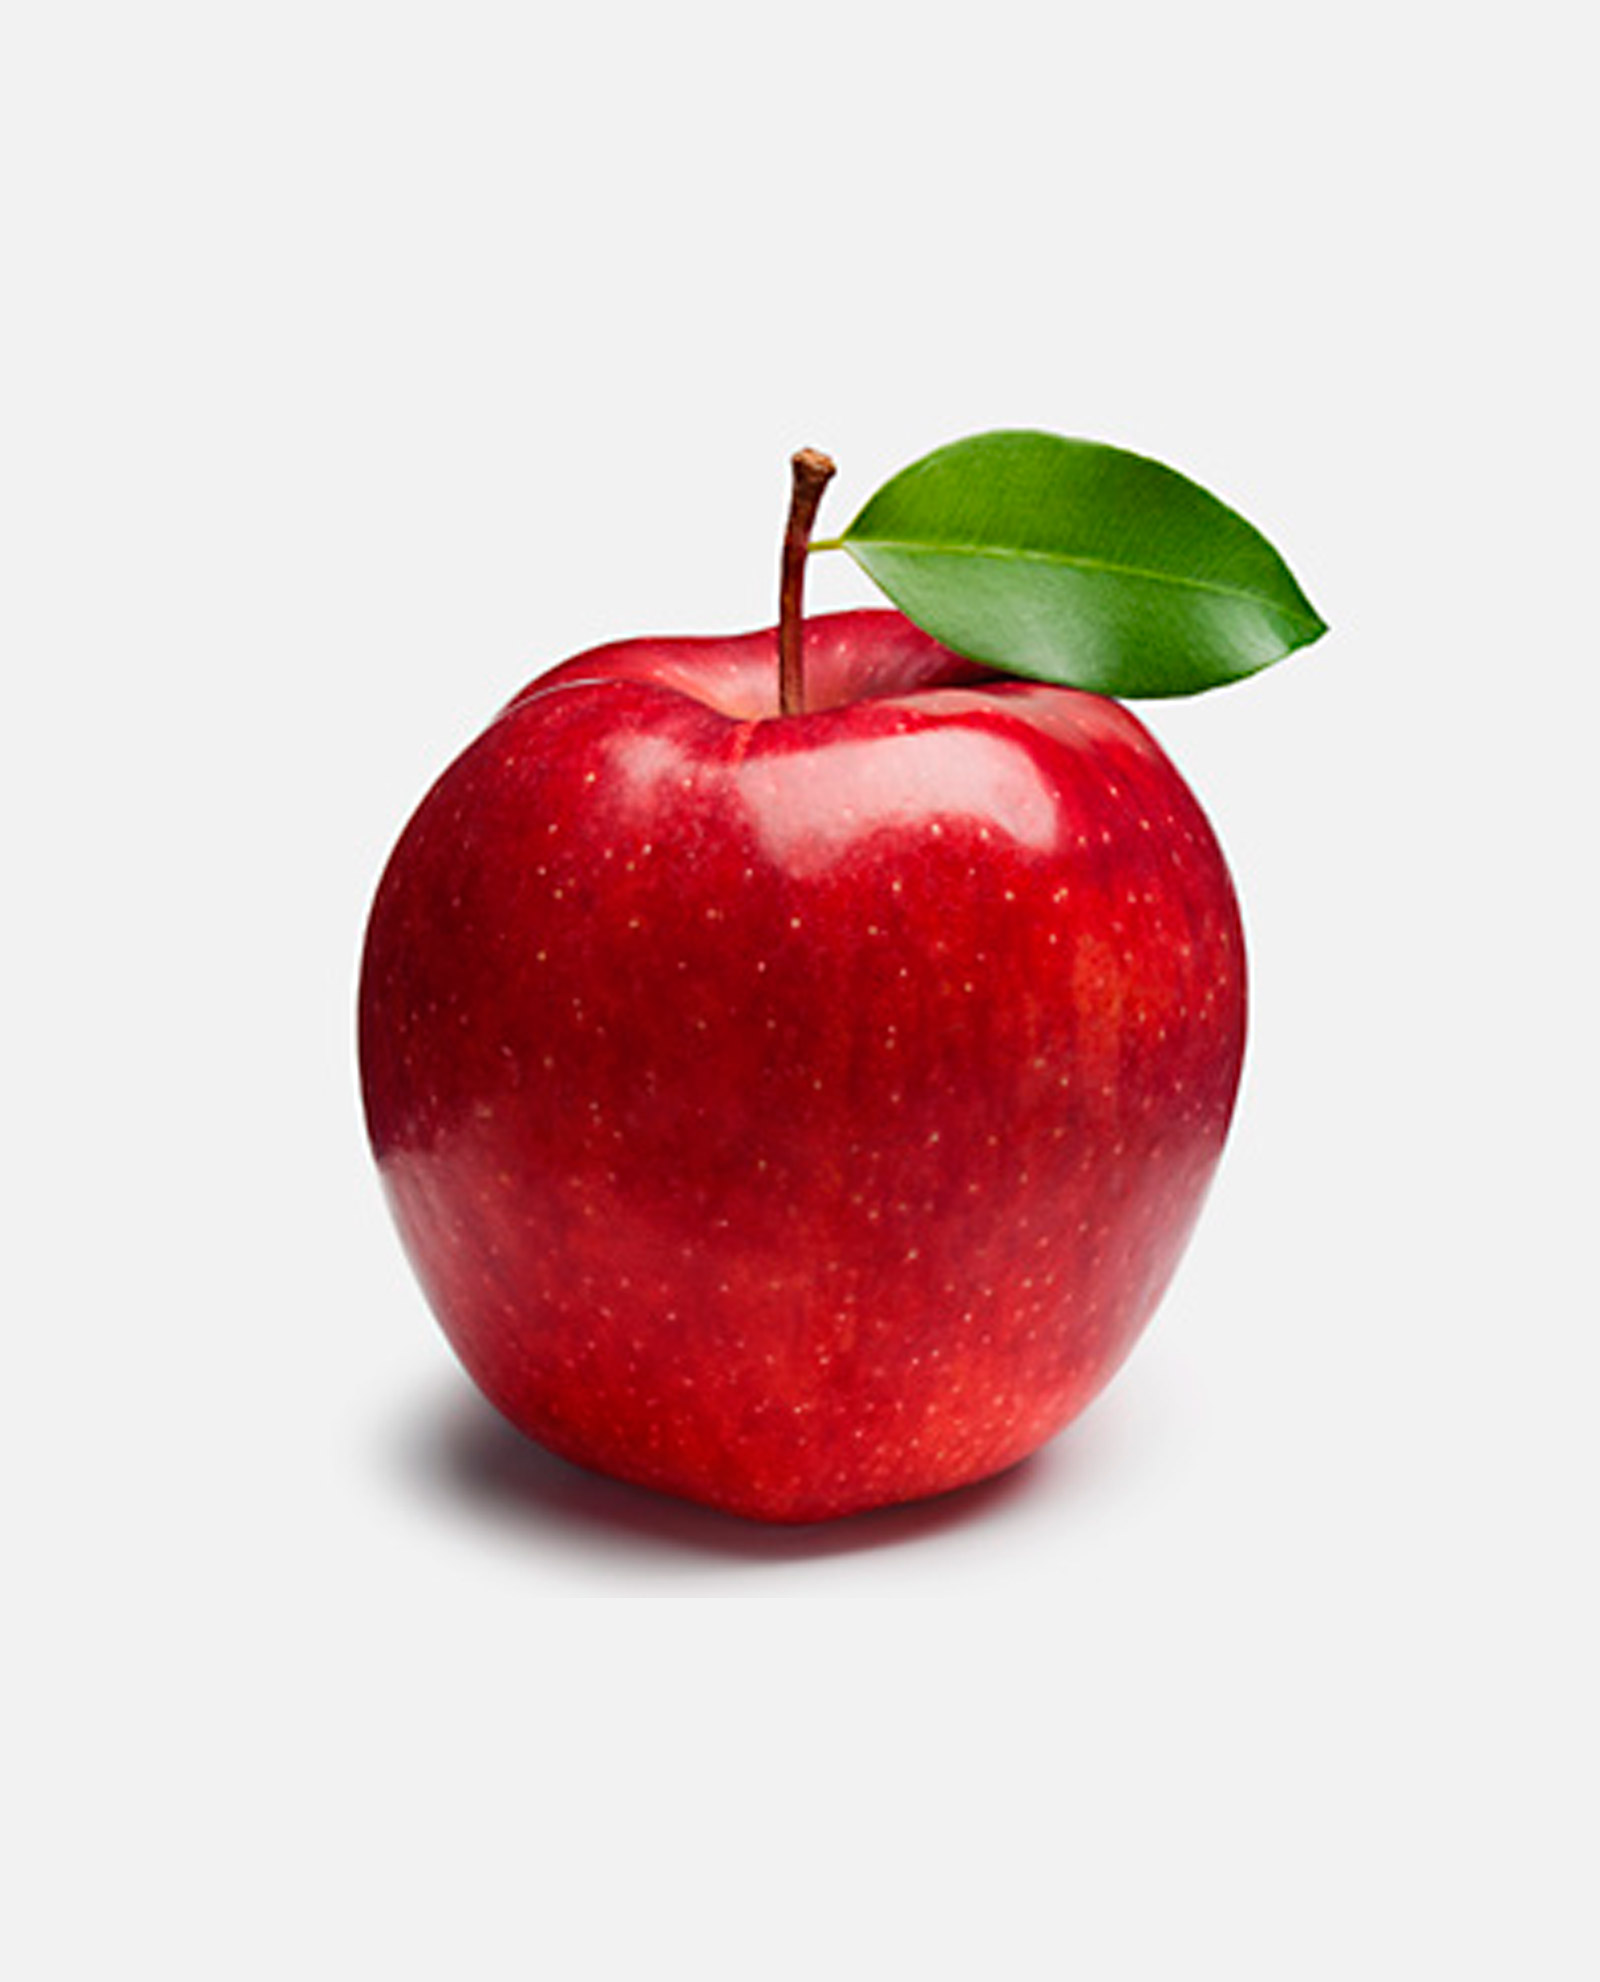 Red apple – Fresher Produce